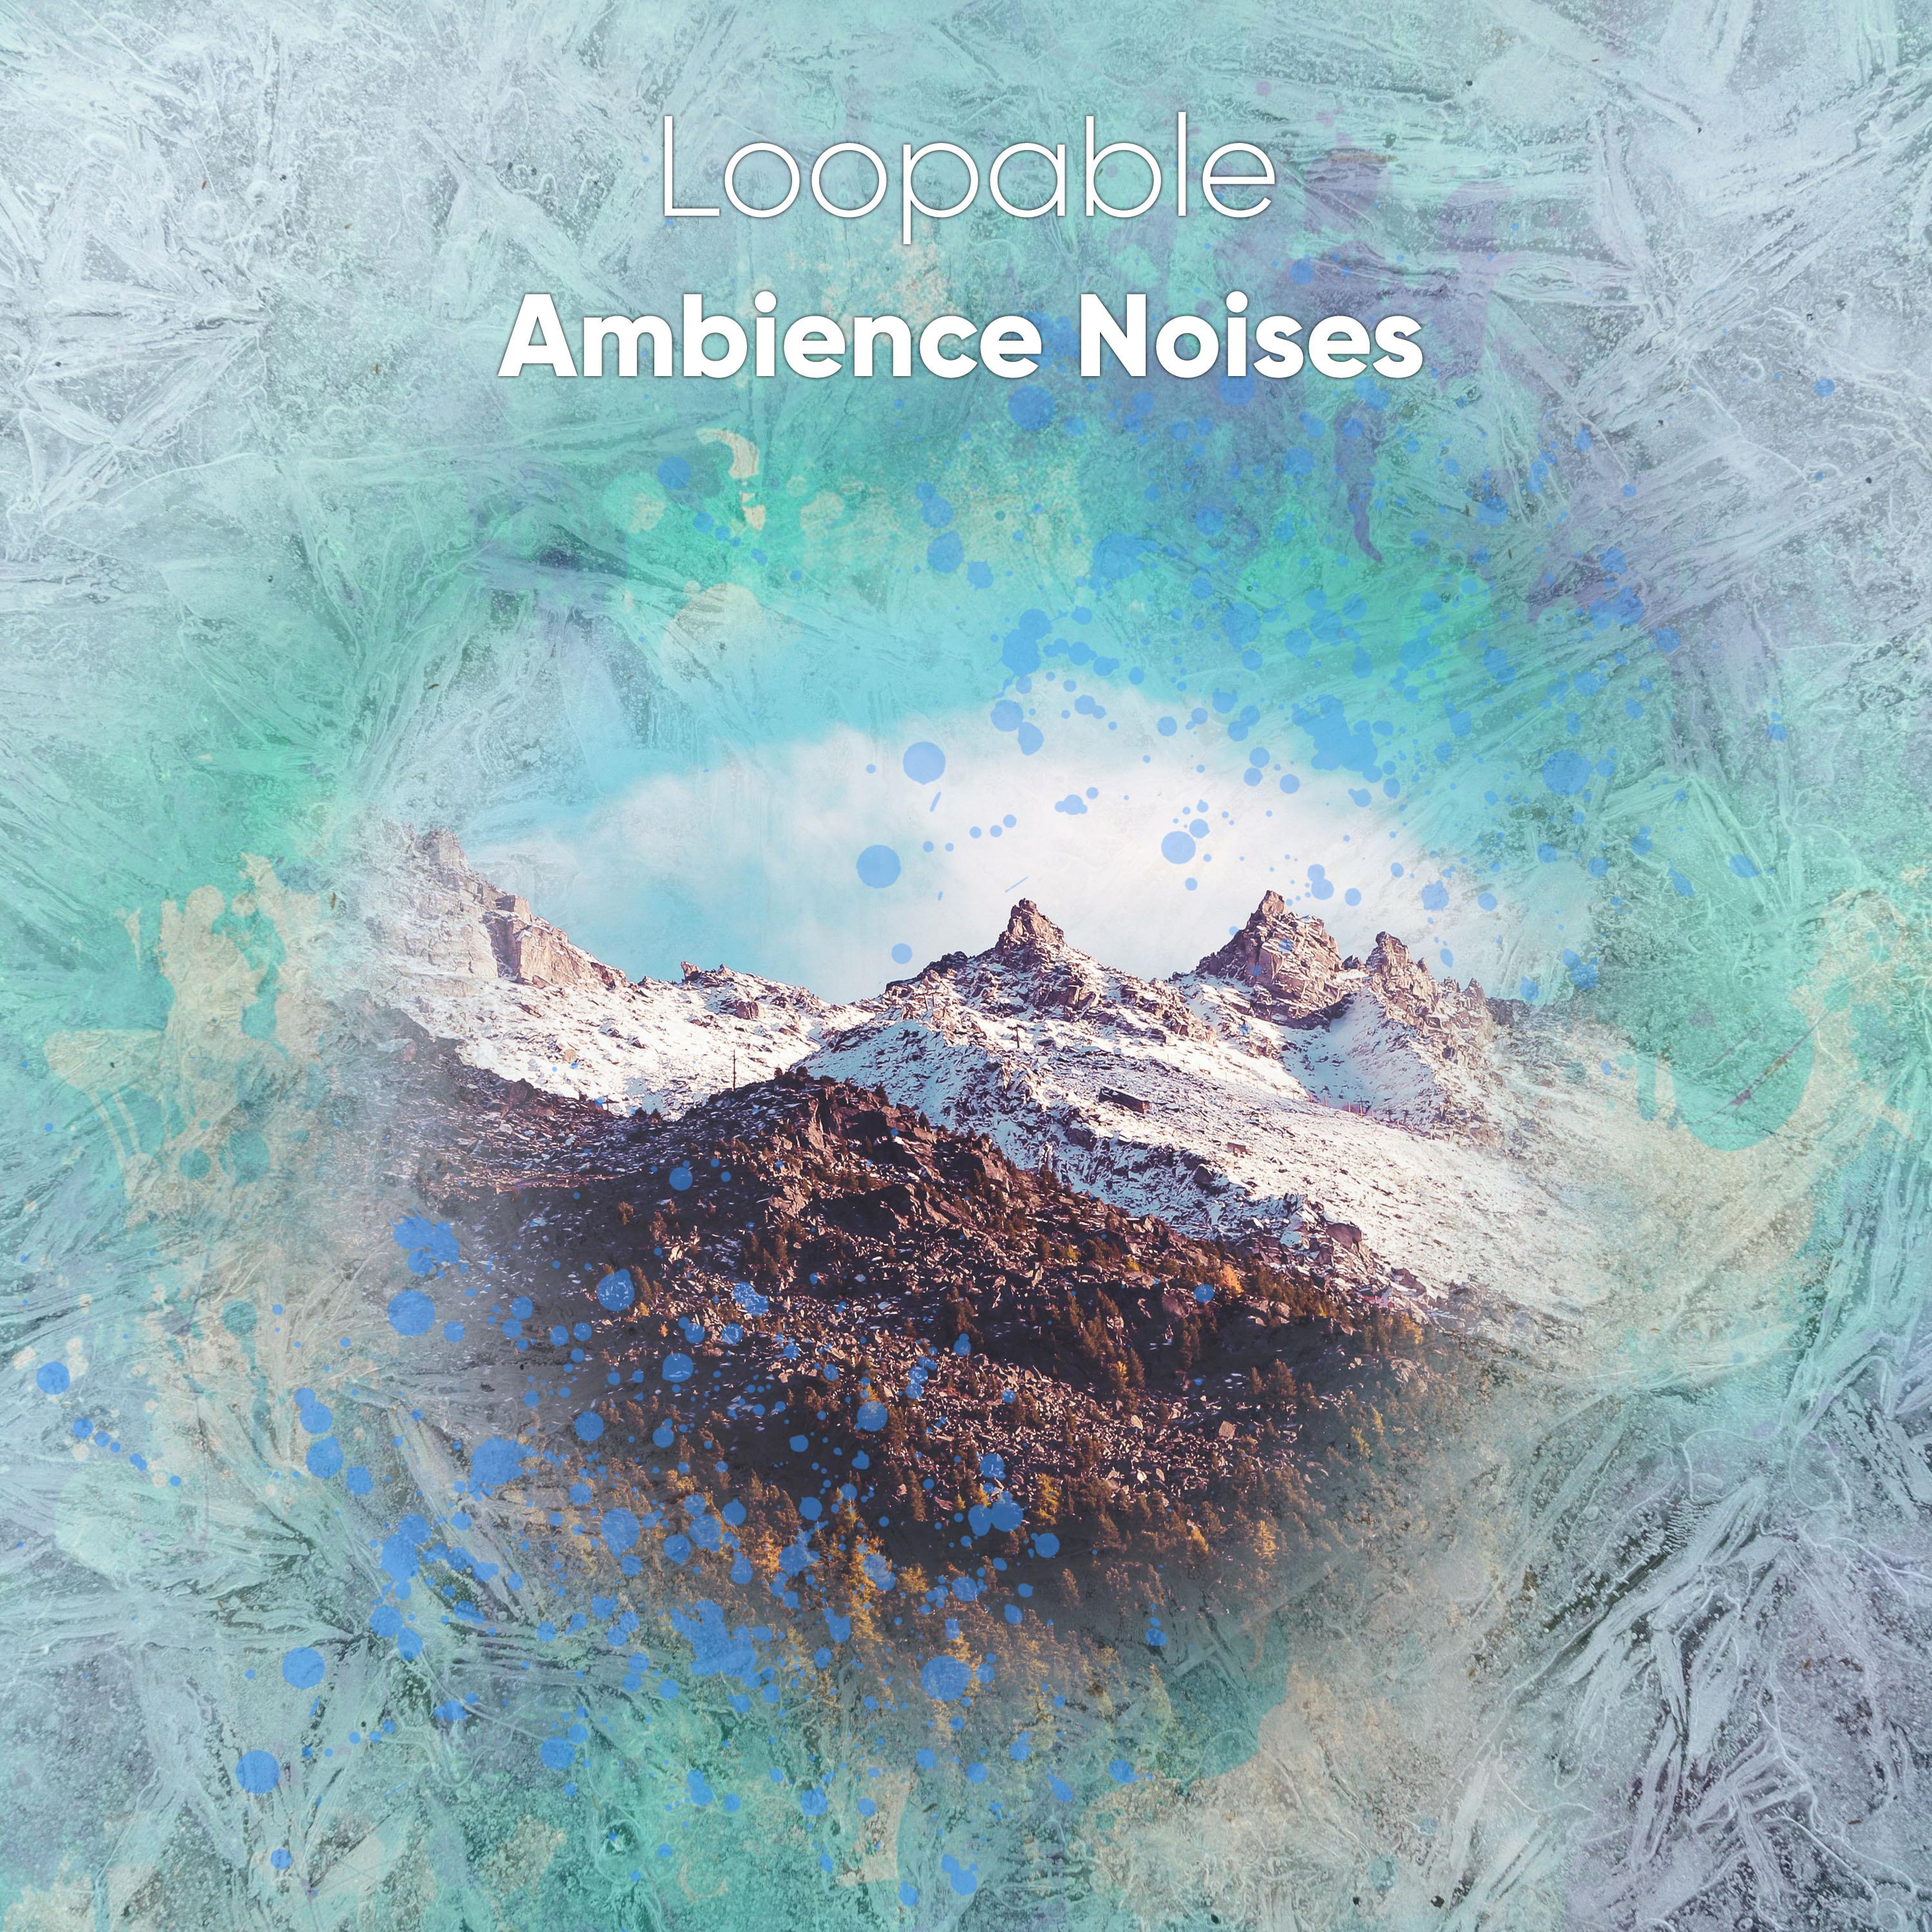 #16 Loopable Ambience Noises to Relieve Stress